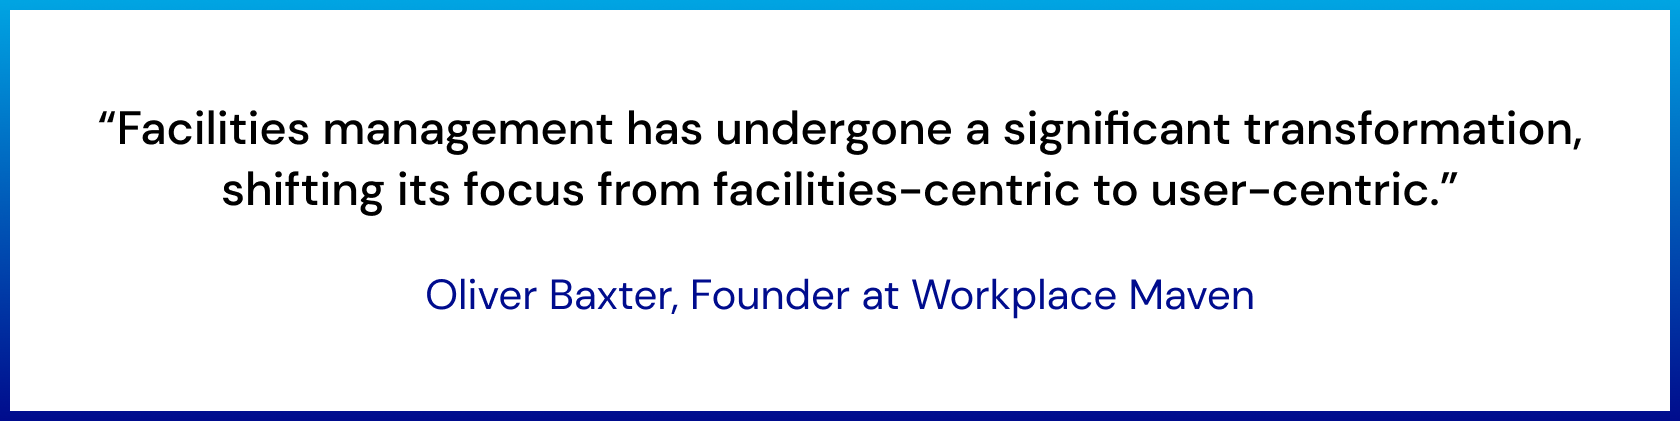 Oliver Baxter on Navigating Facilities Management in the Era of Flexible Work